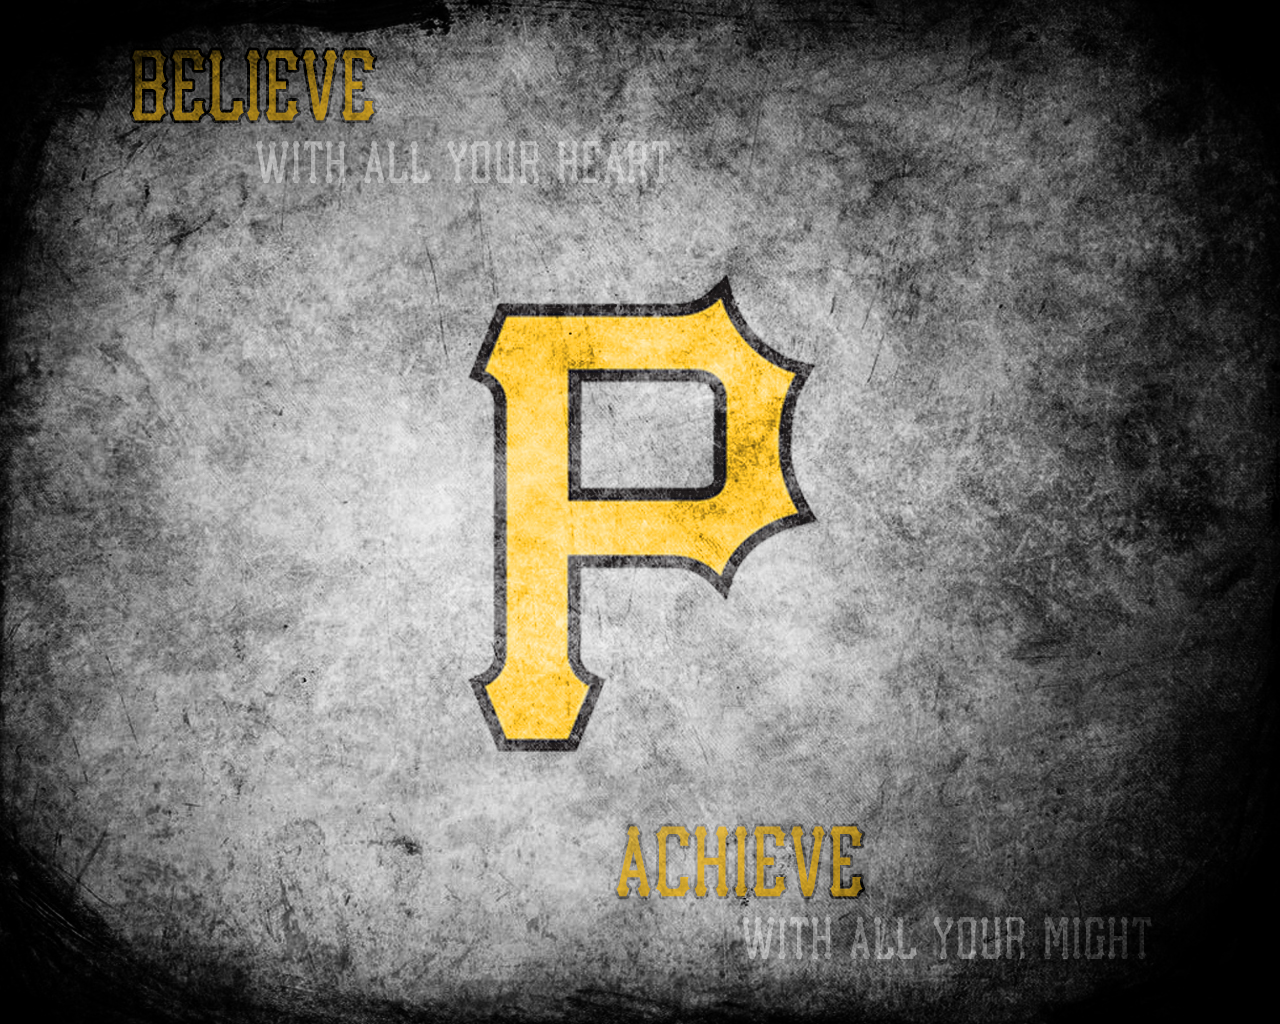  by PSF on Monday January 7 2013In Pittsburgh Pirates Wallpapers